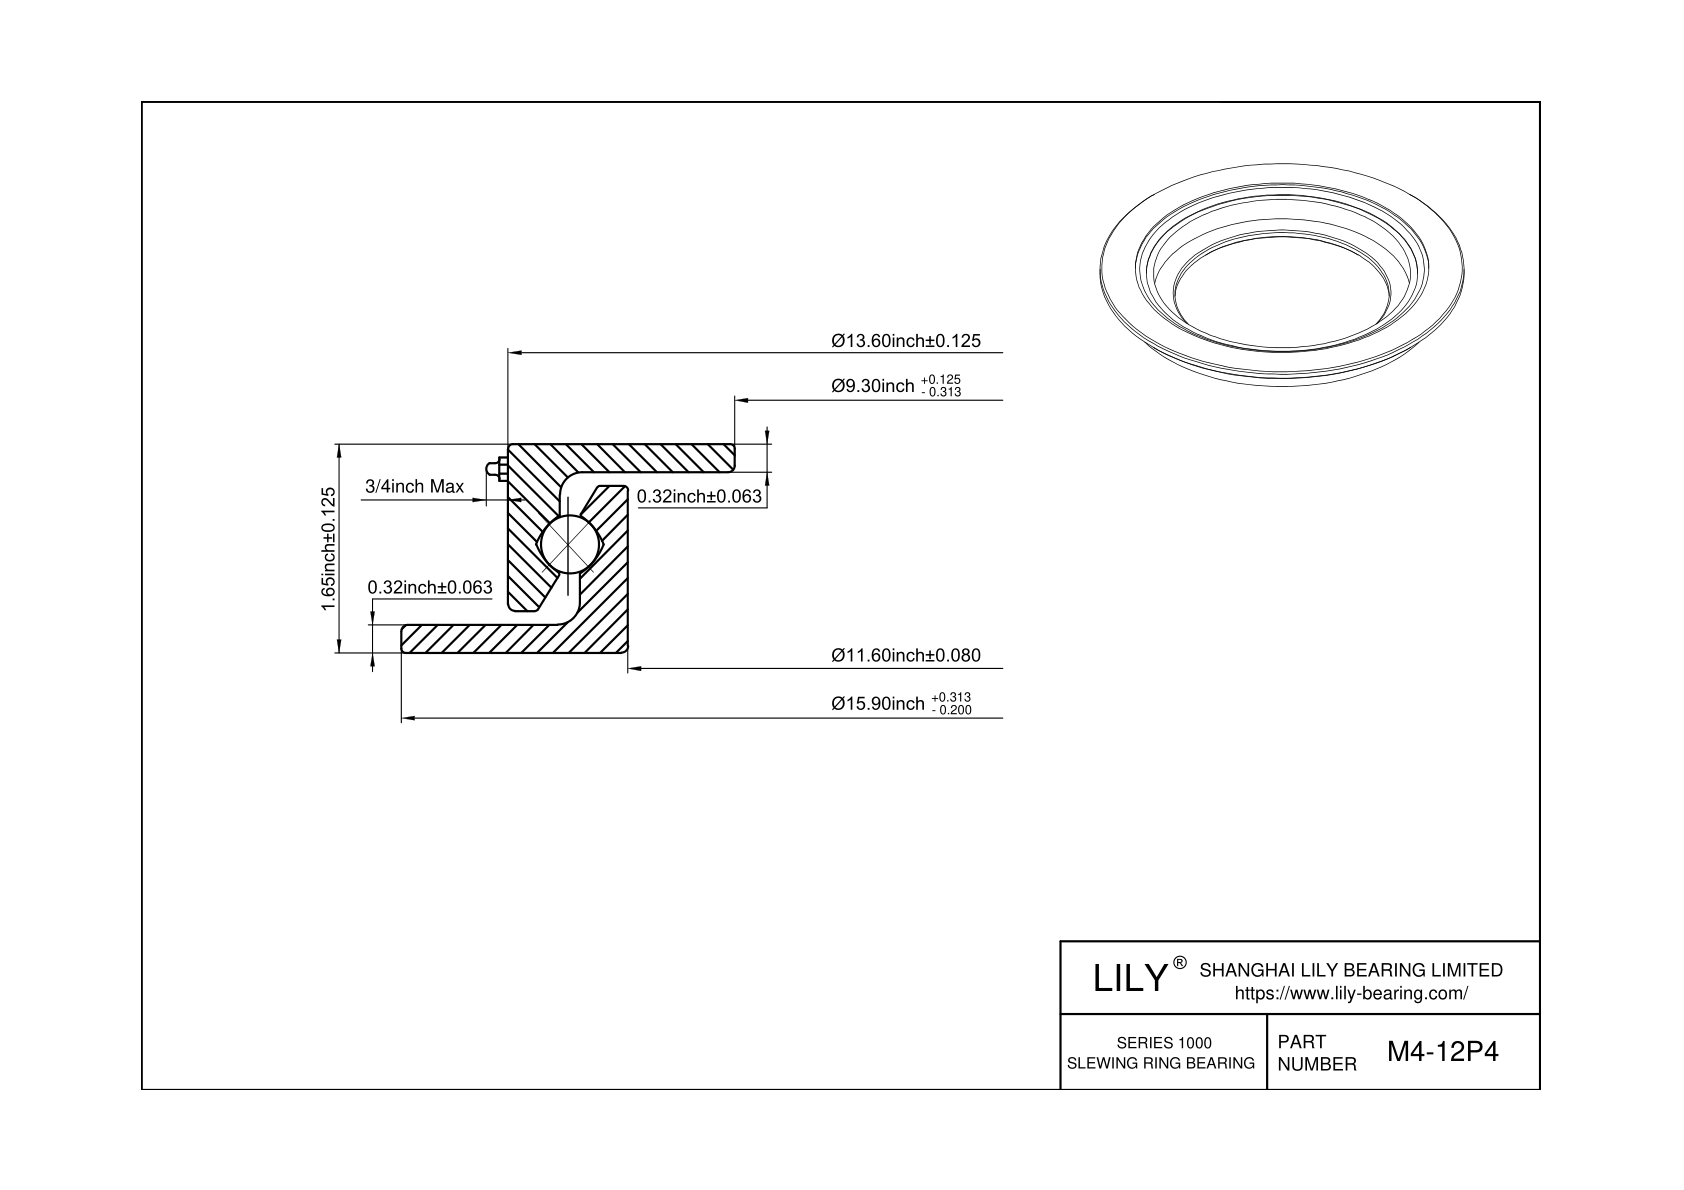 M4-12P4 Developed For Use In Transport Vehicles cad drawing